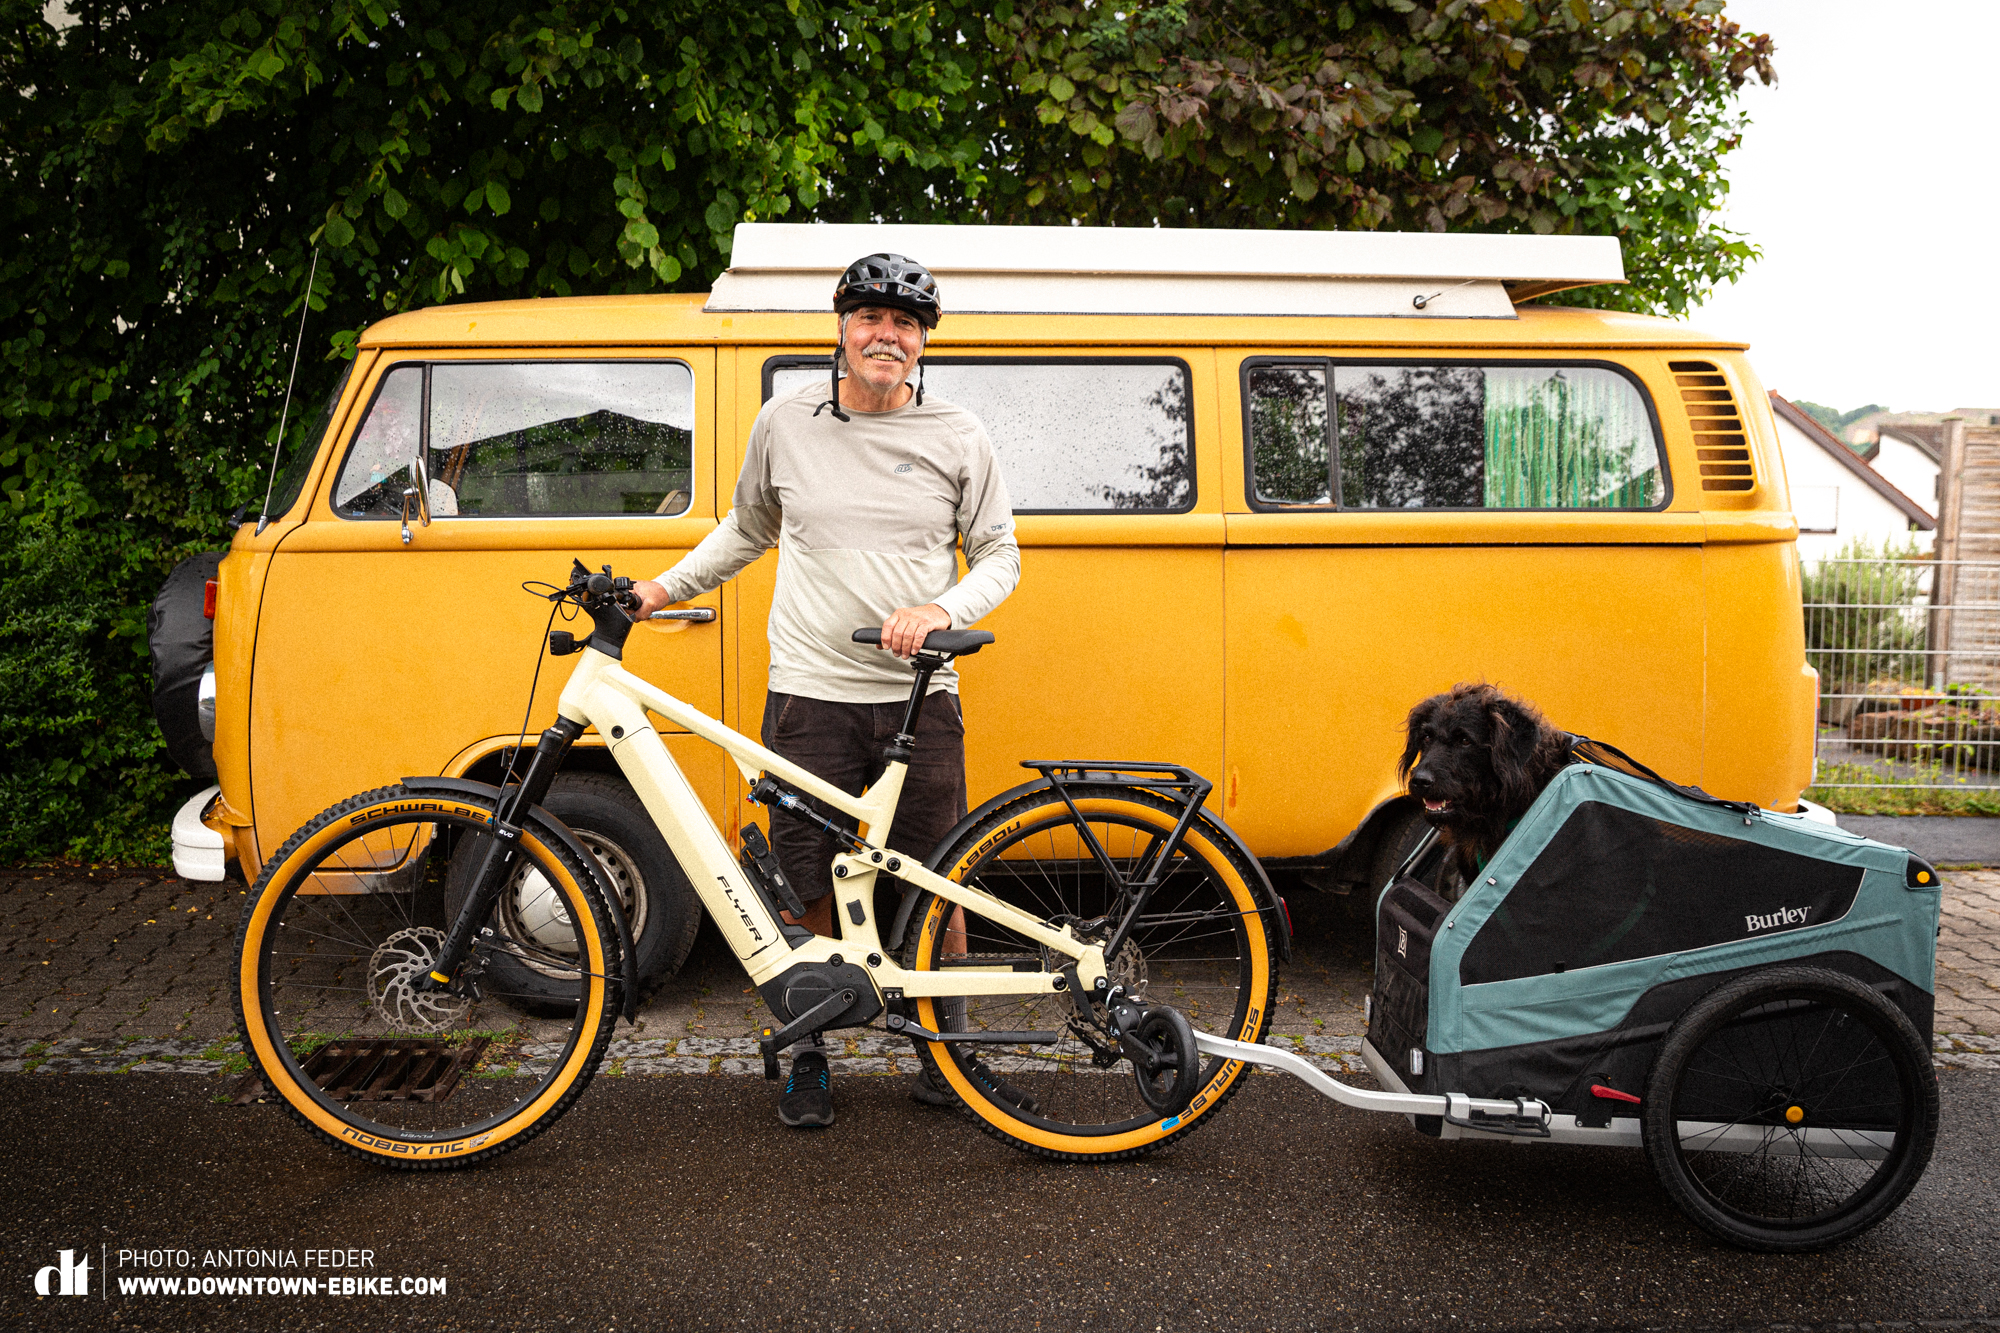 Manne is standing in front of a VW bus with a bicycle and dog trailer and is the same length.